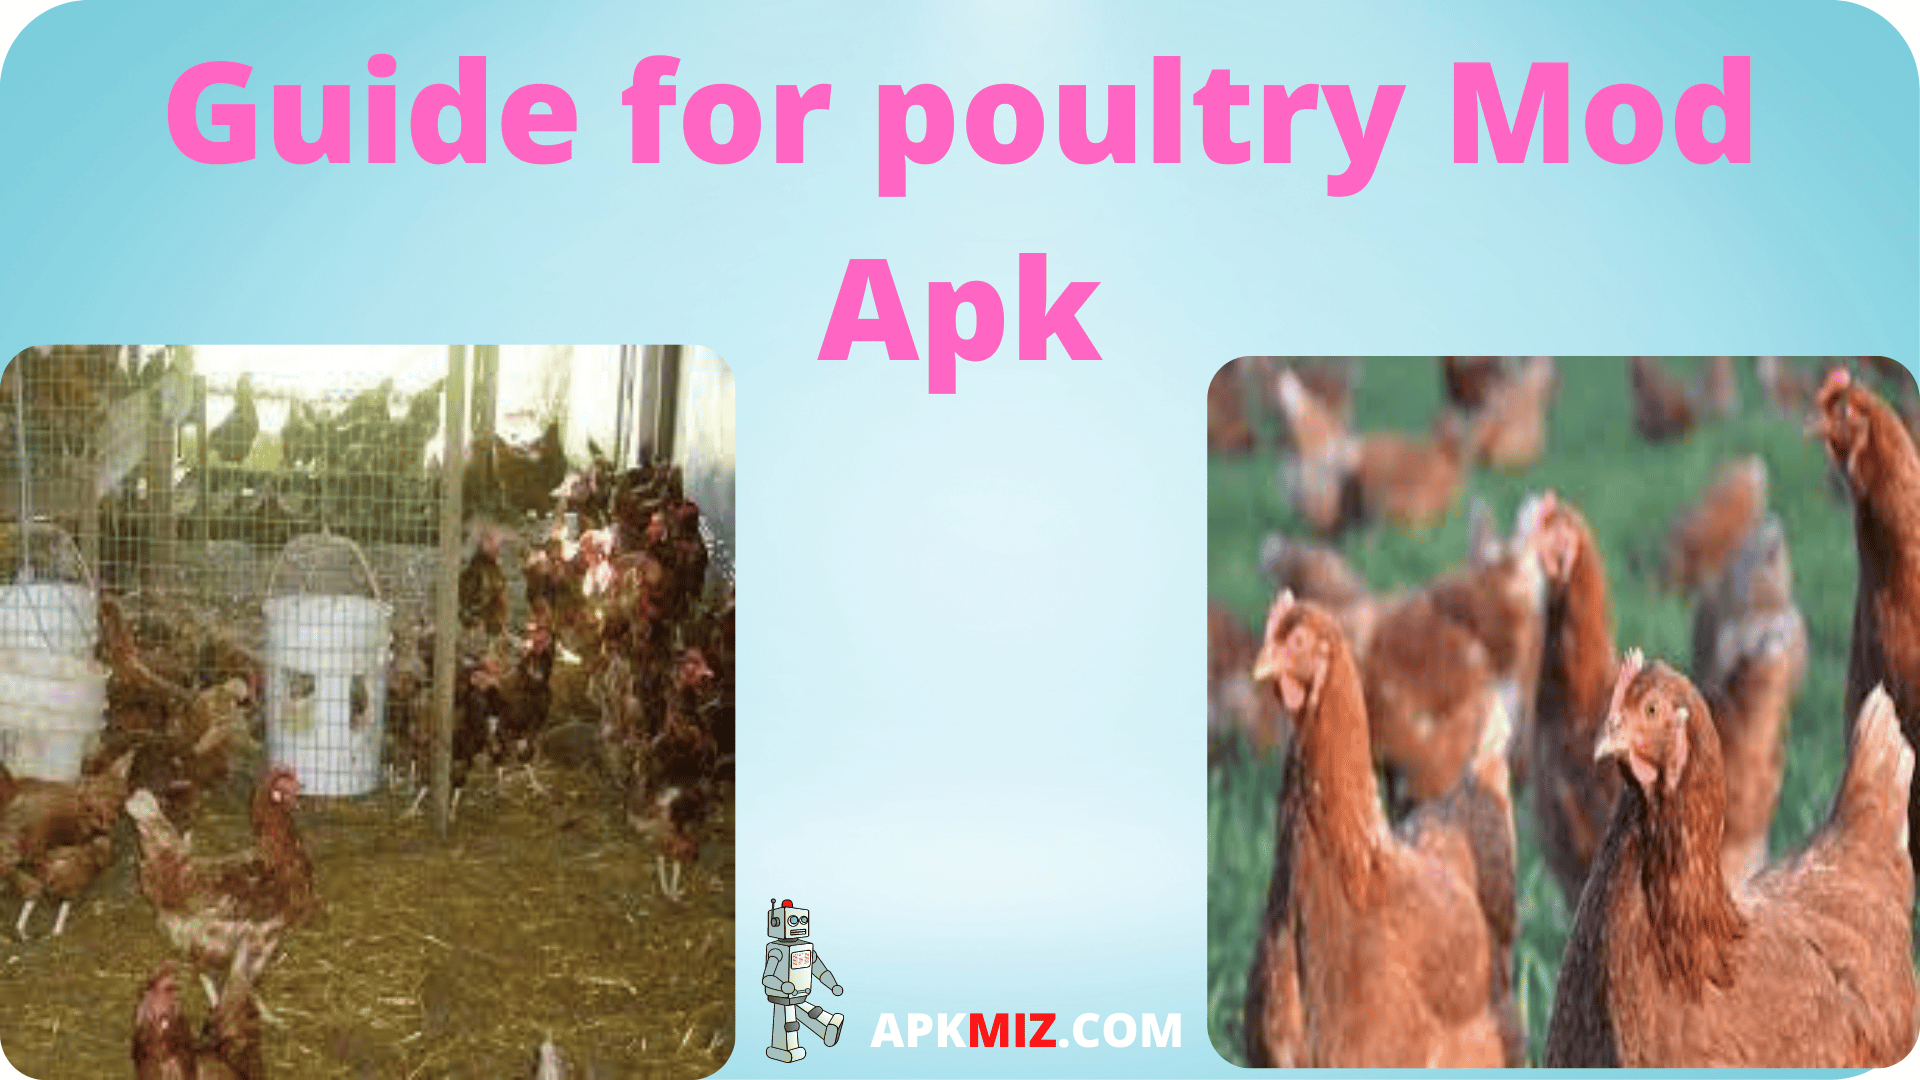 Guide for poultry Mod Apk